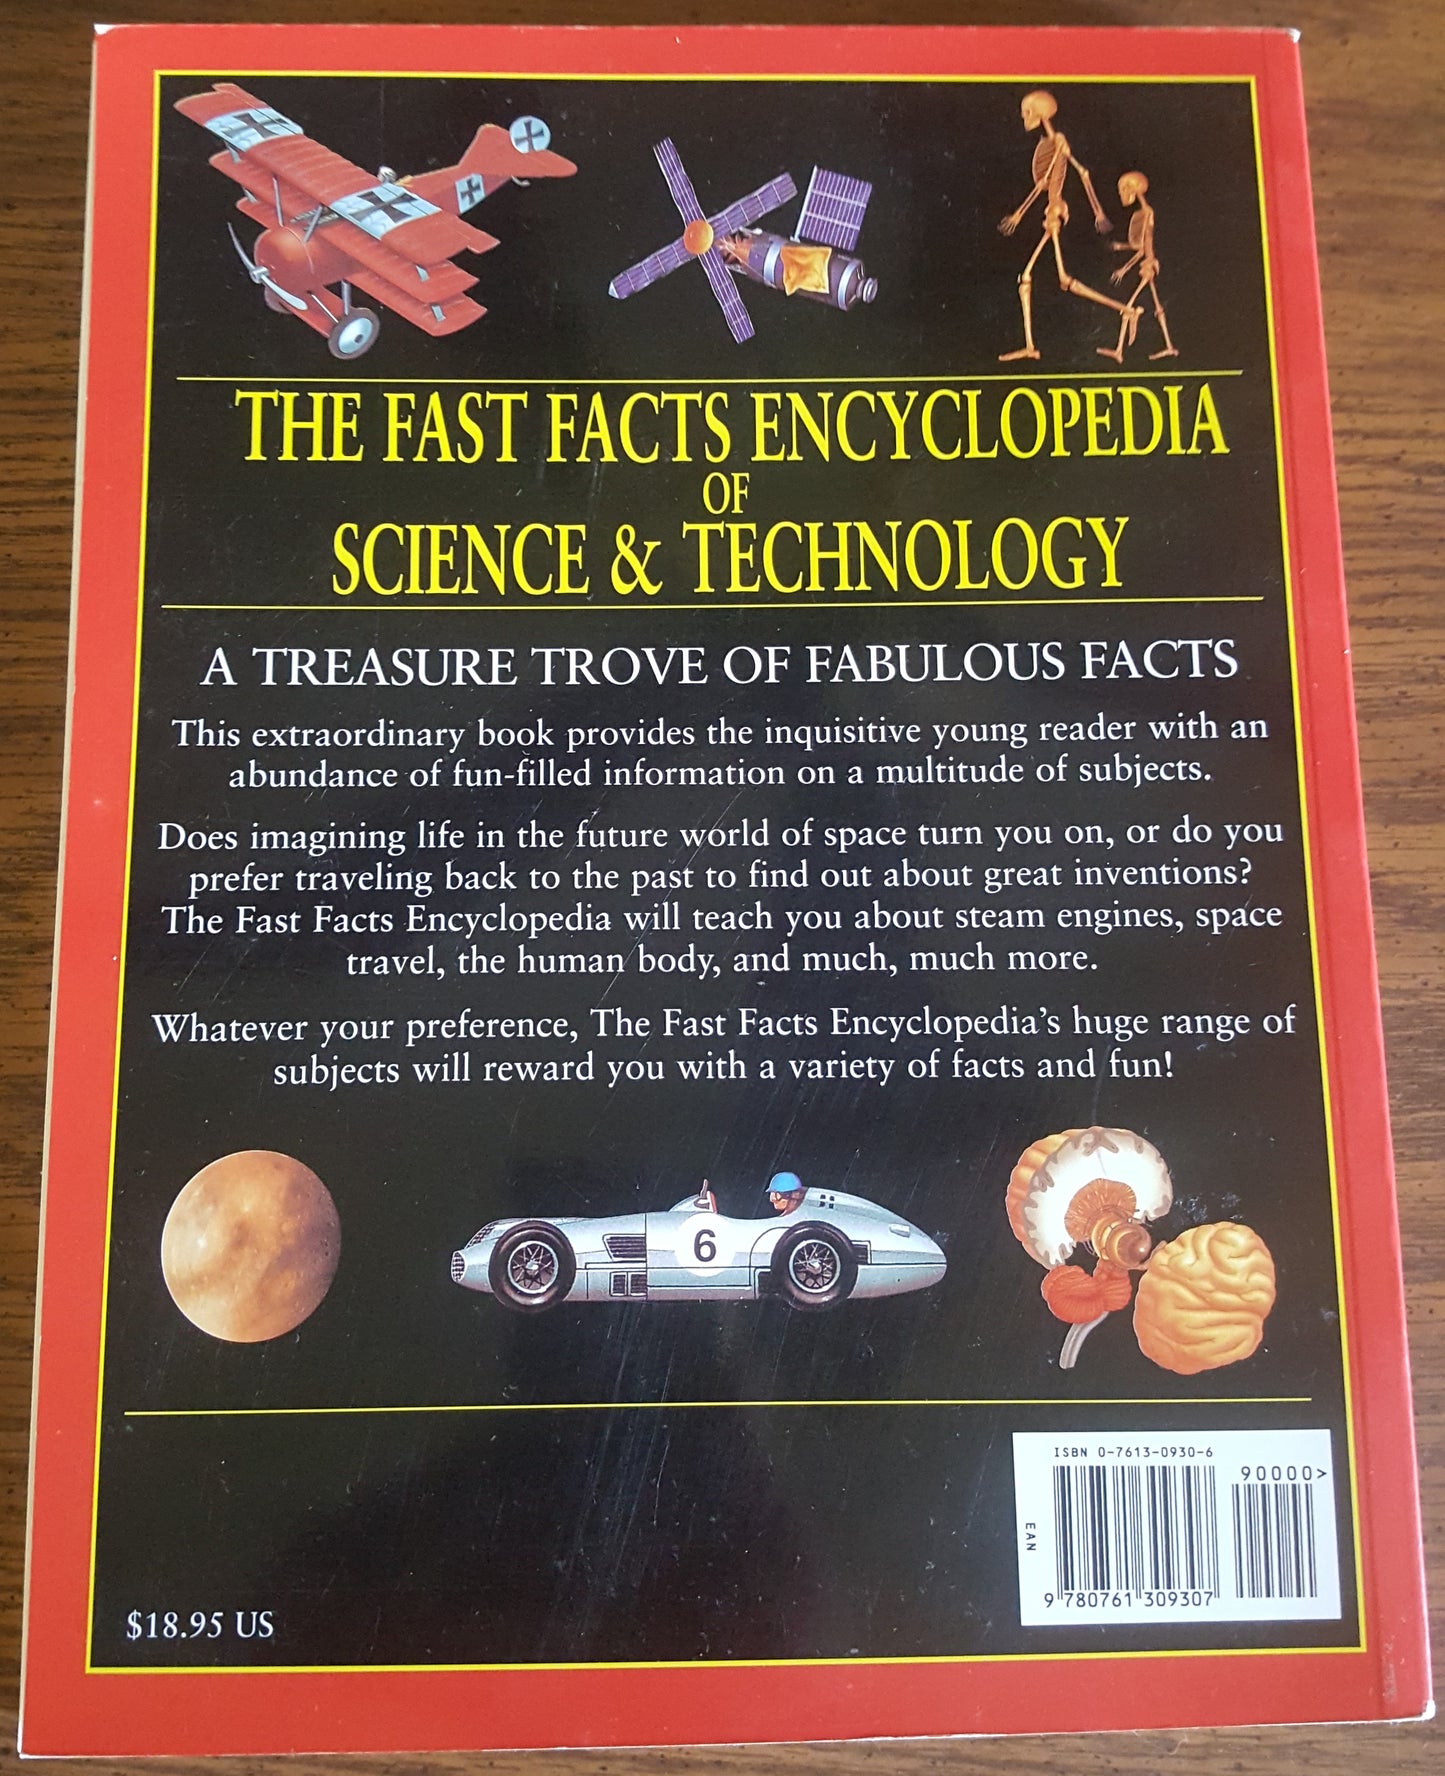 The Fast Facts Encyclopedia of Science and Technology